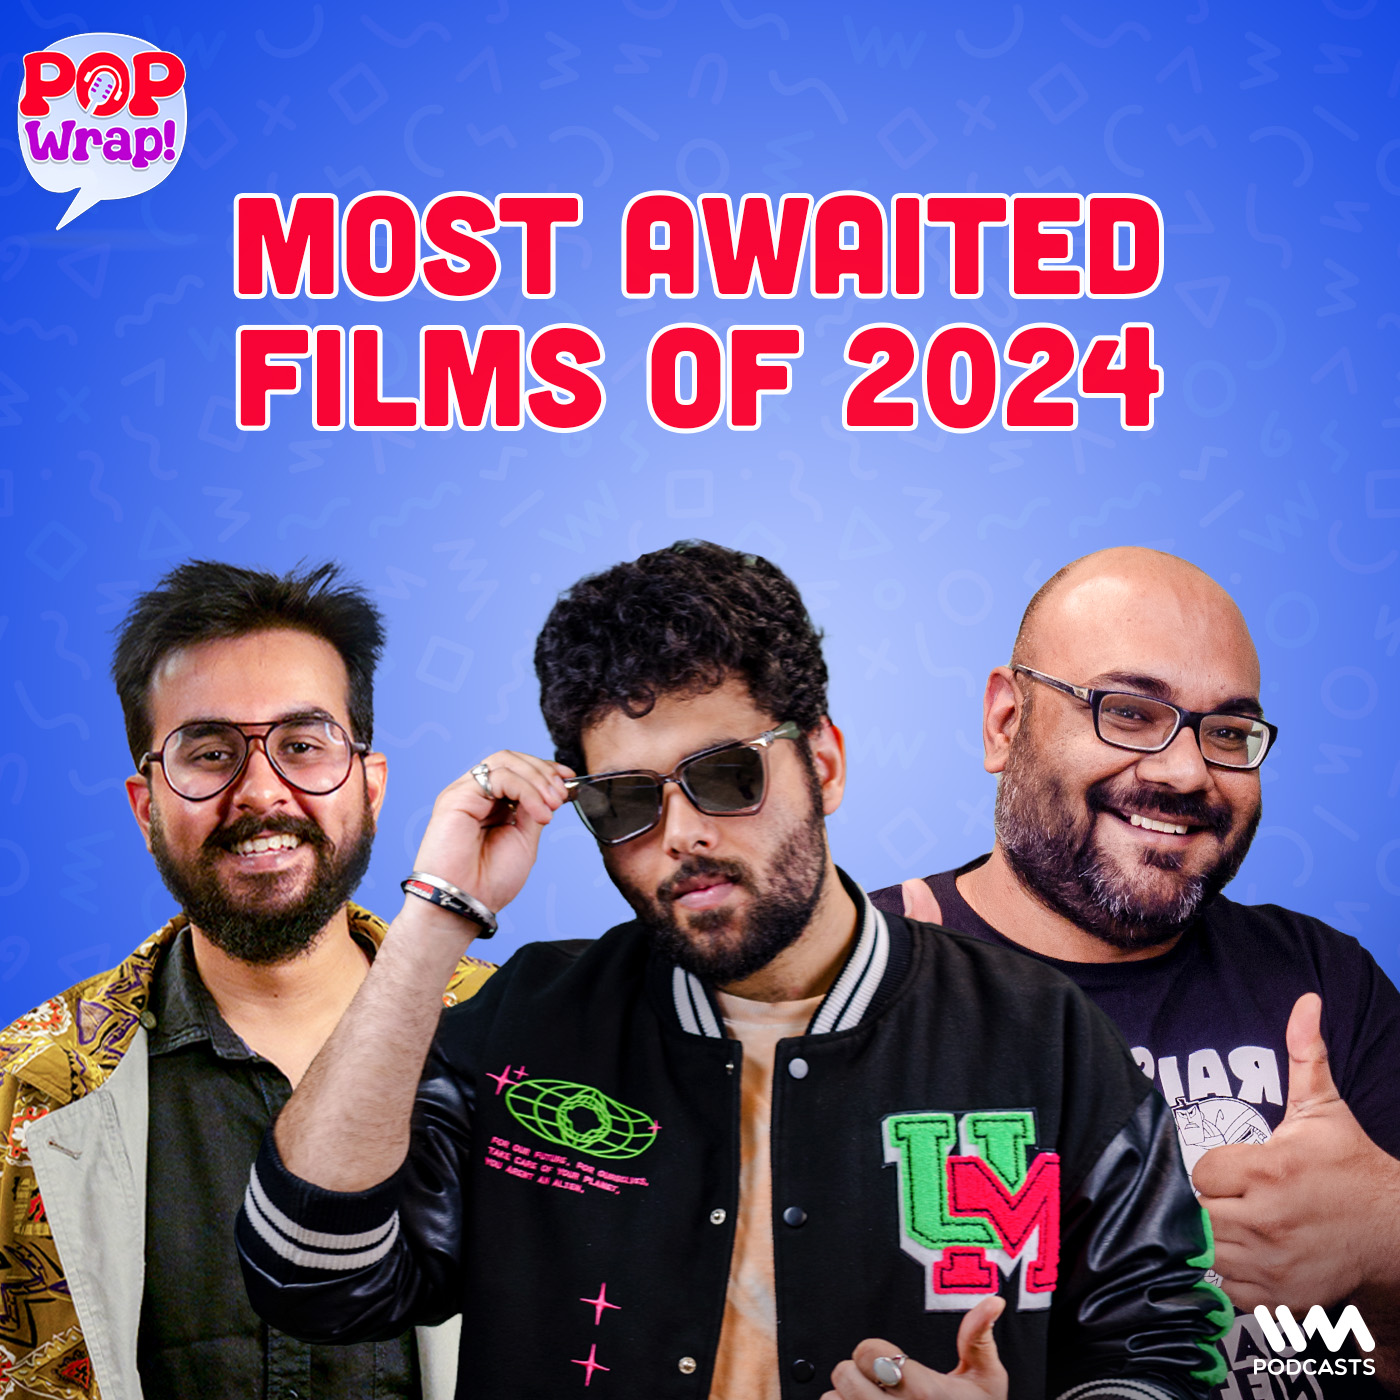 Most awaited films of 2024 | Pop Wrap!